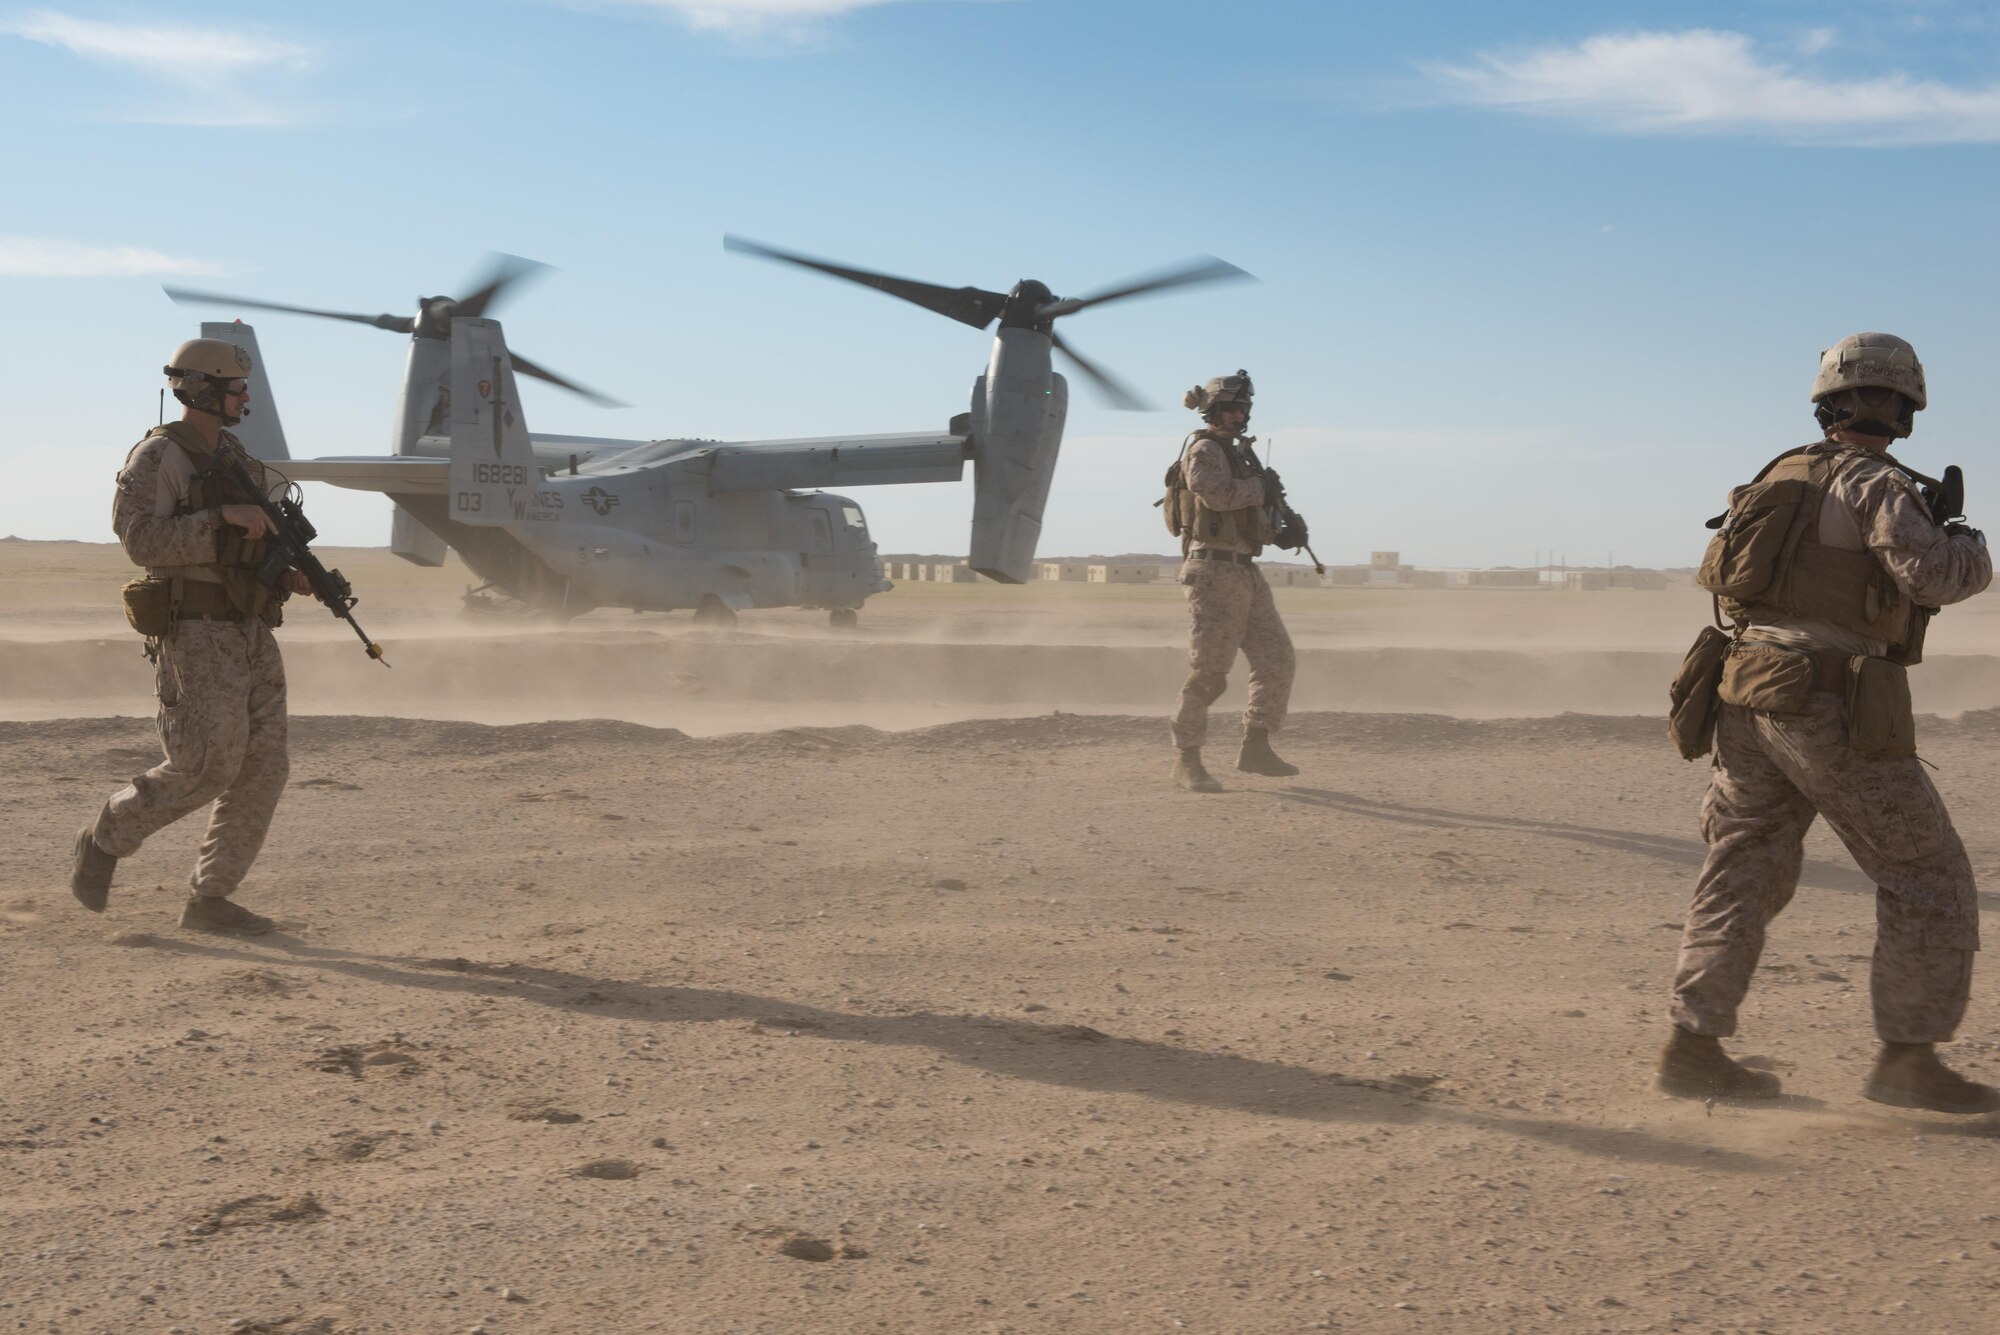 U.S. Marines assigned to 1st Battalion, 7th Marine Regiment,  Special Purpose Marine Air-Ground Task Force-Crisis Response-Central Command  exercise the tactical recovery of aircraft and personnel with an MV-22 Osprey assigned to t Marine Medium Tiltrotor Squadron 165 at an undisclosed location in Southwest Asia, April 5, 2017. The Marines, who are assigned to the Special Purpose Marine Air Ground Task Force, regularly exercise the capability to keep their skills sharp while in the deployed location. (U.S. Air Force photo/Master Sgt. Benjamin Wilson)(Released)